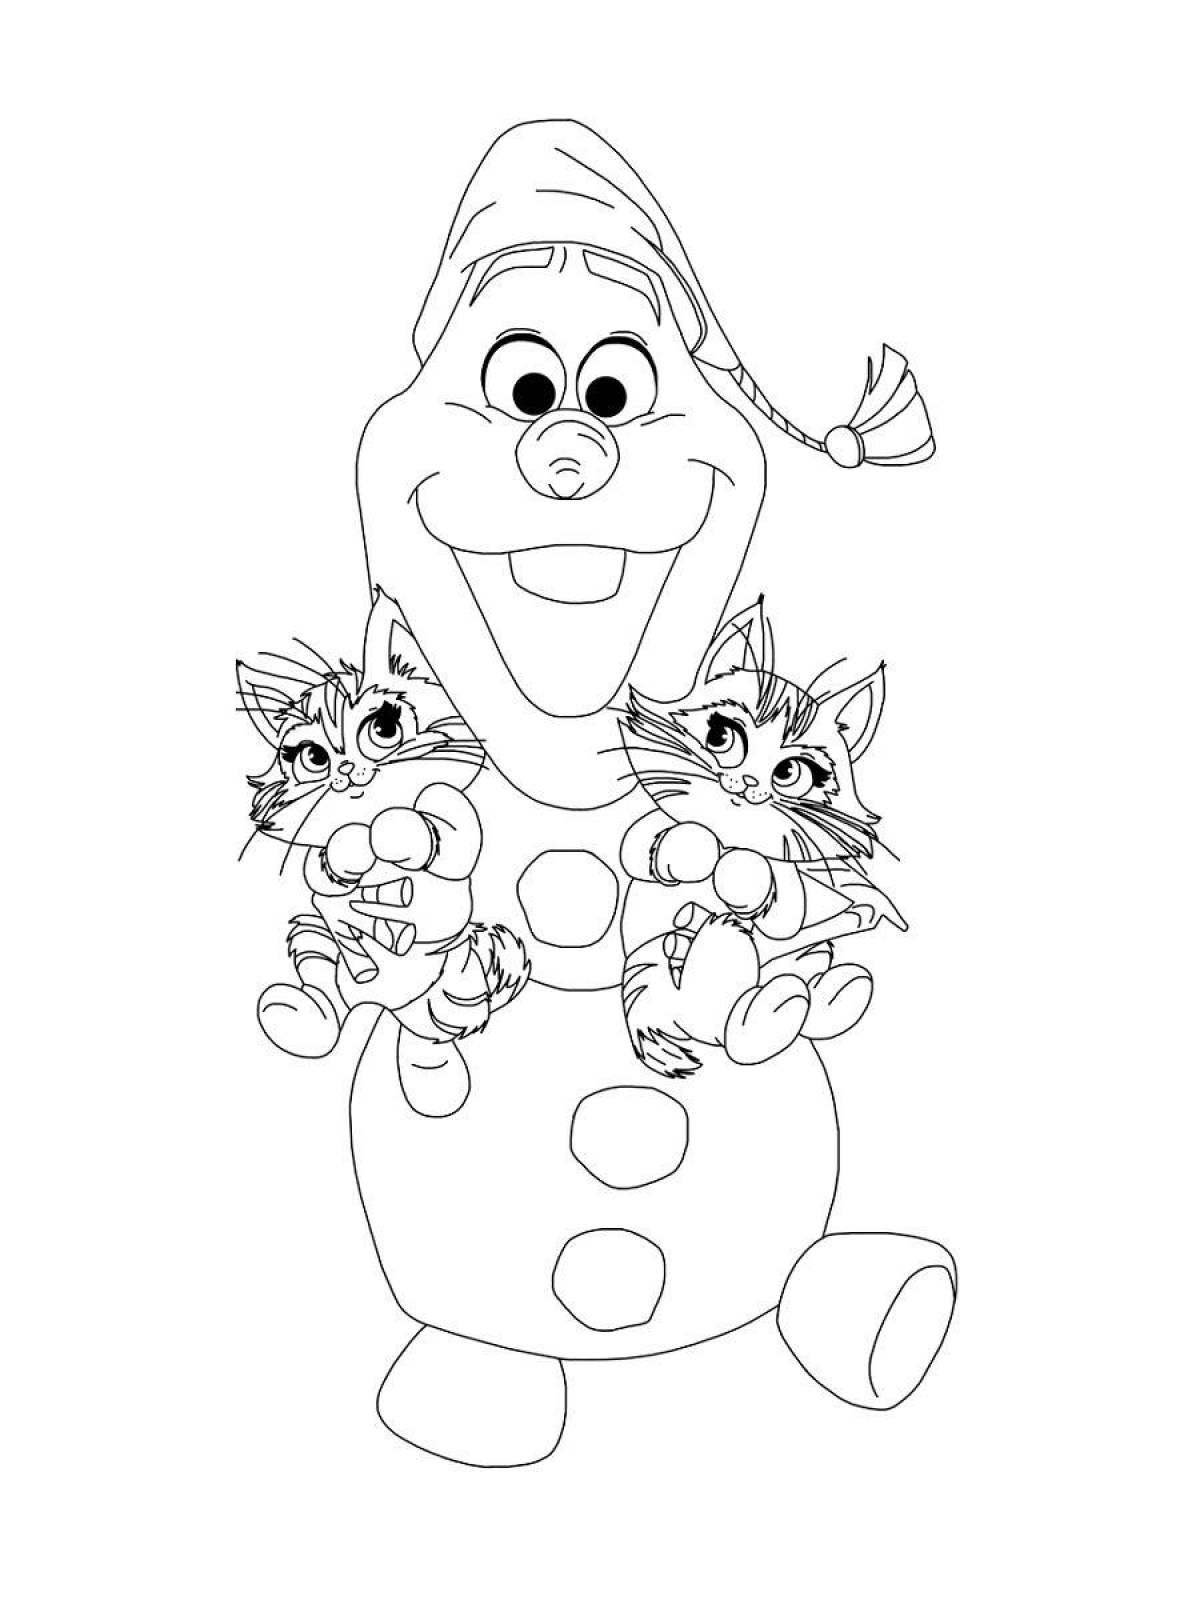 Olaf's gorgeous coloring book